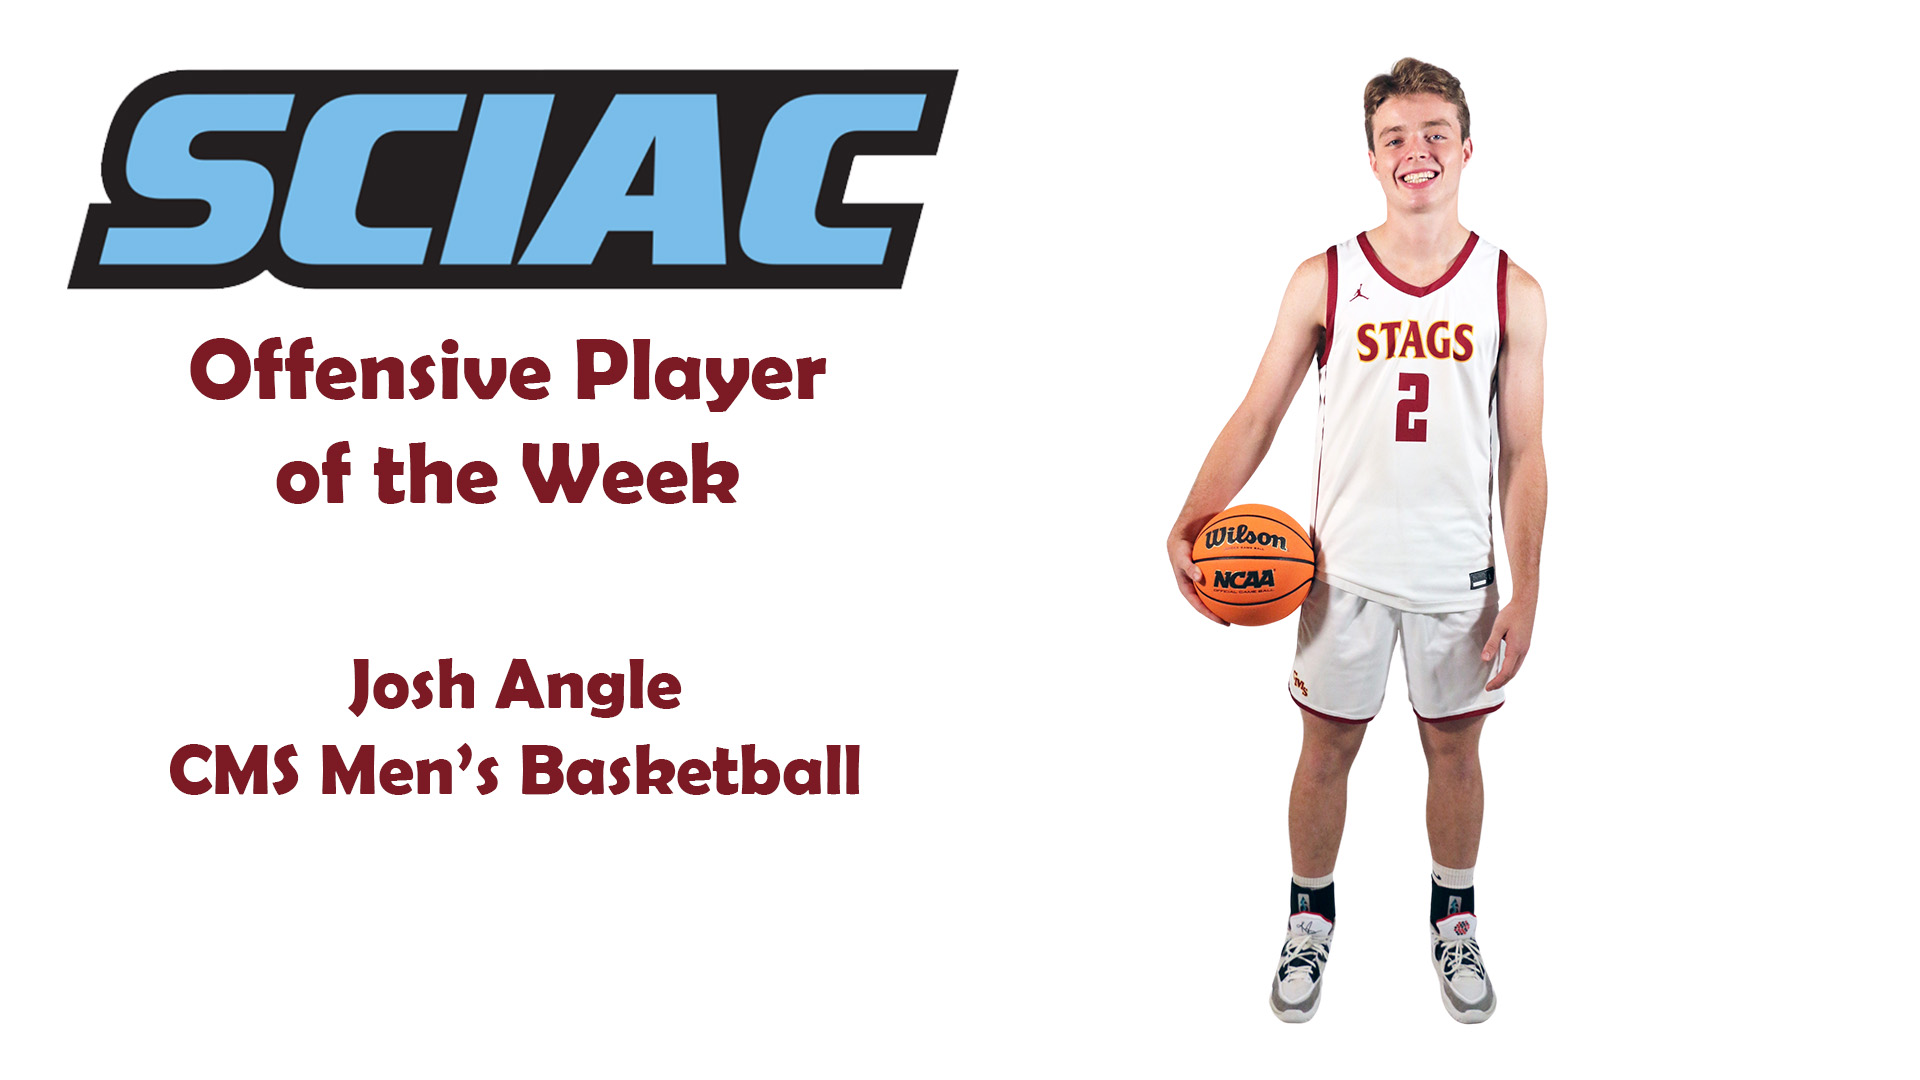 posed shot of Josh Angle with the SCIAC logo